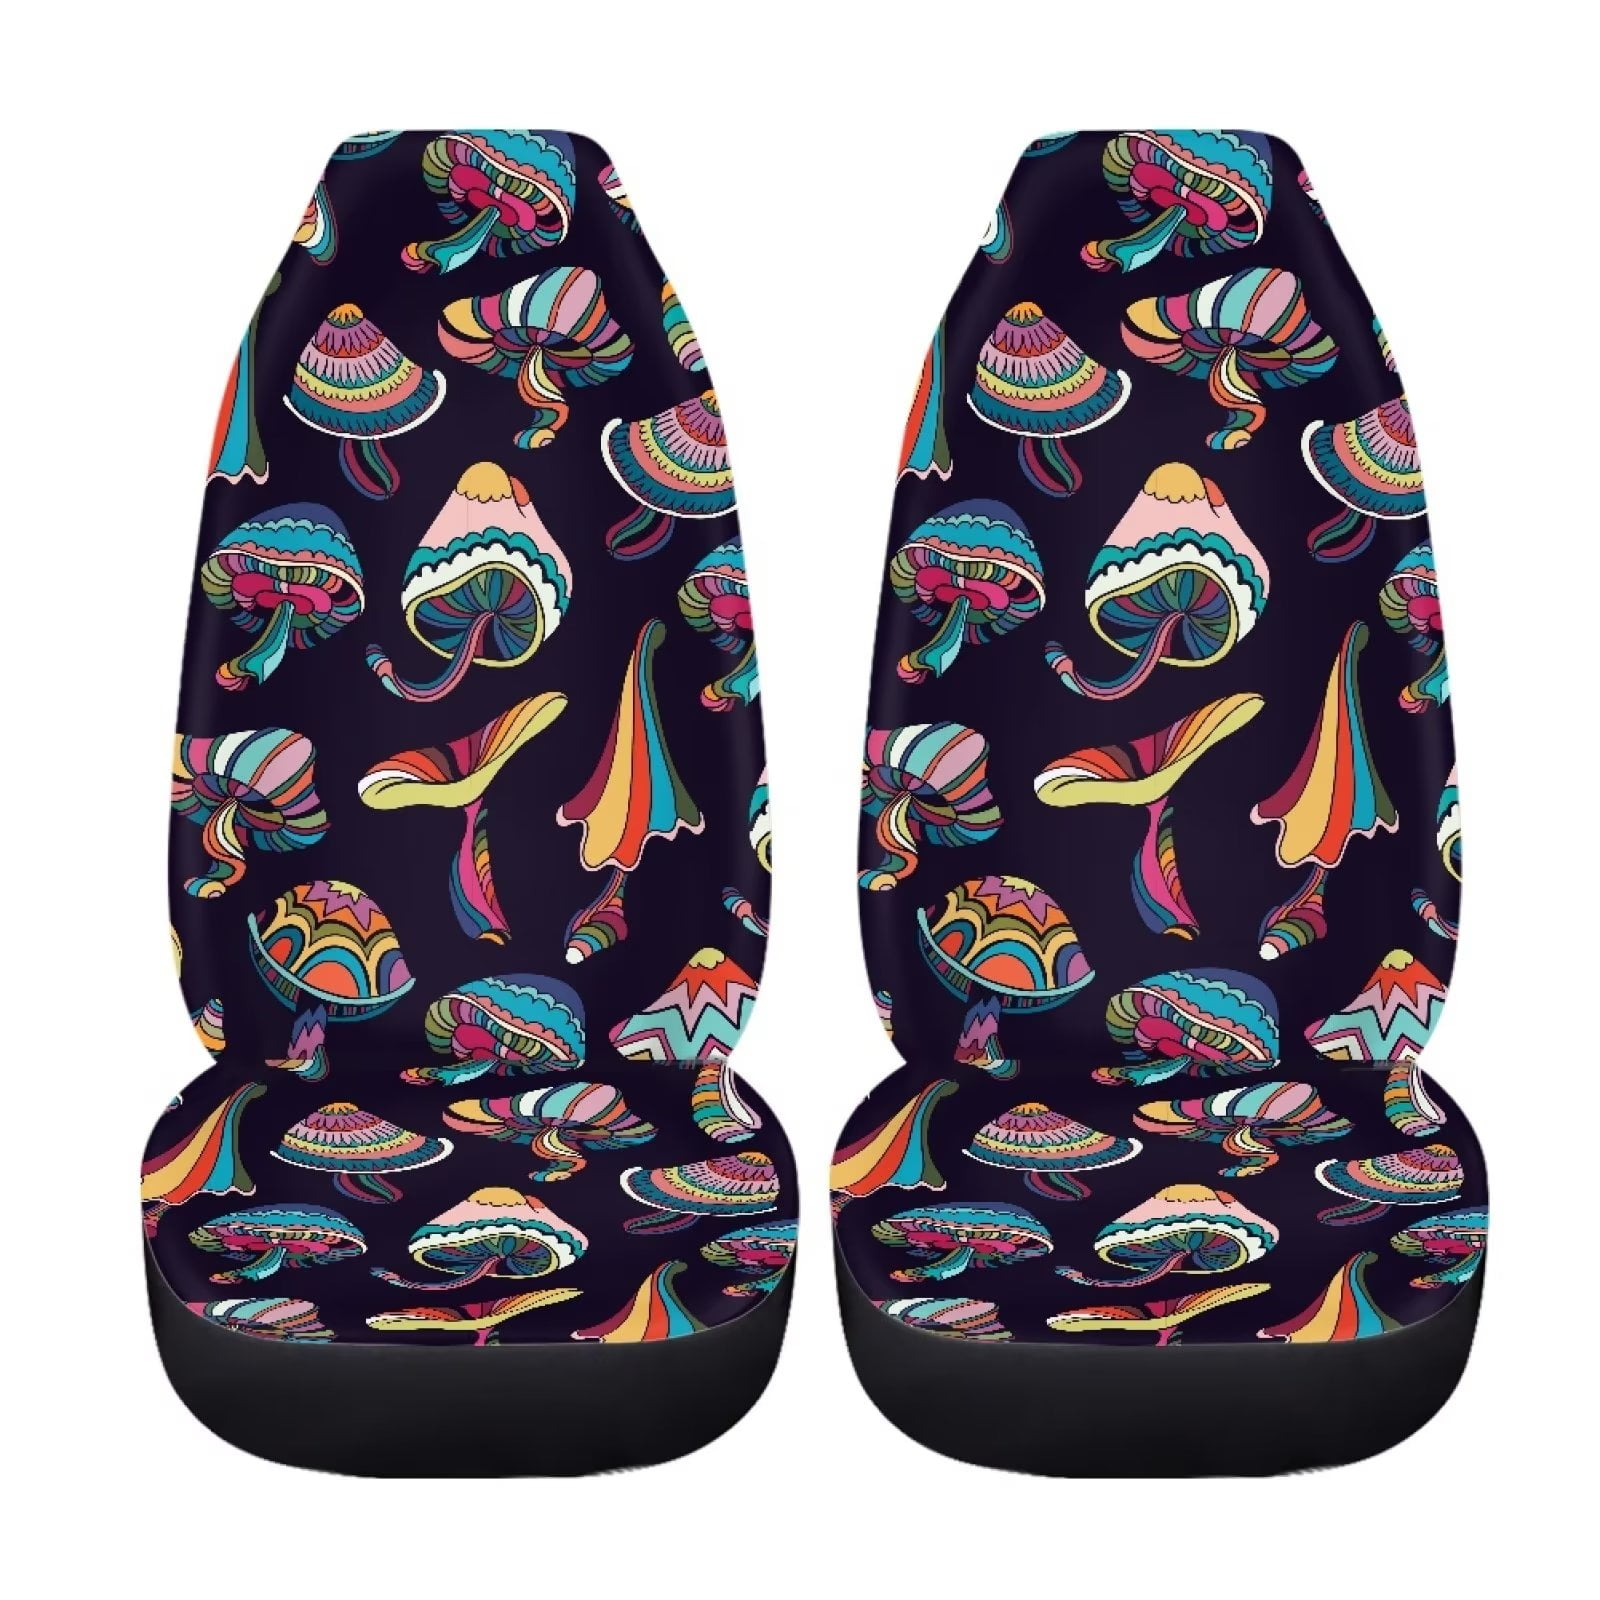 FKELYI Psychedelic Mushroom Car Seat Covers Full Set of 2,Stretchy